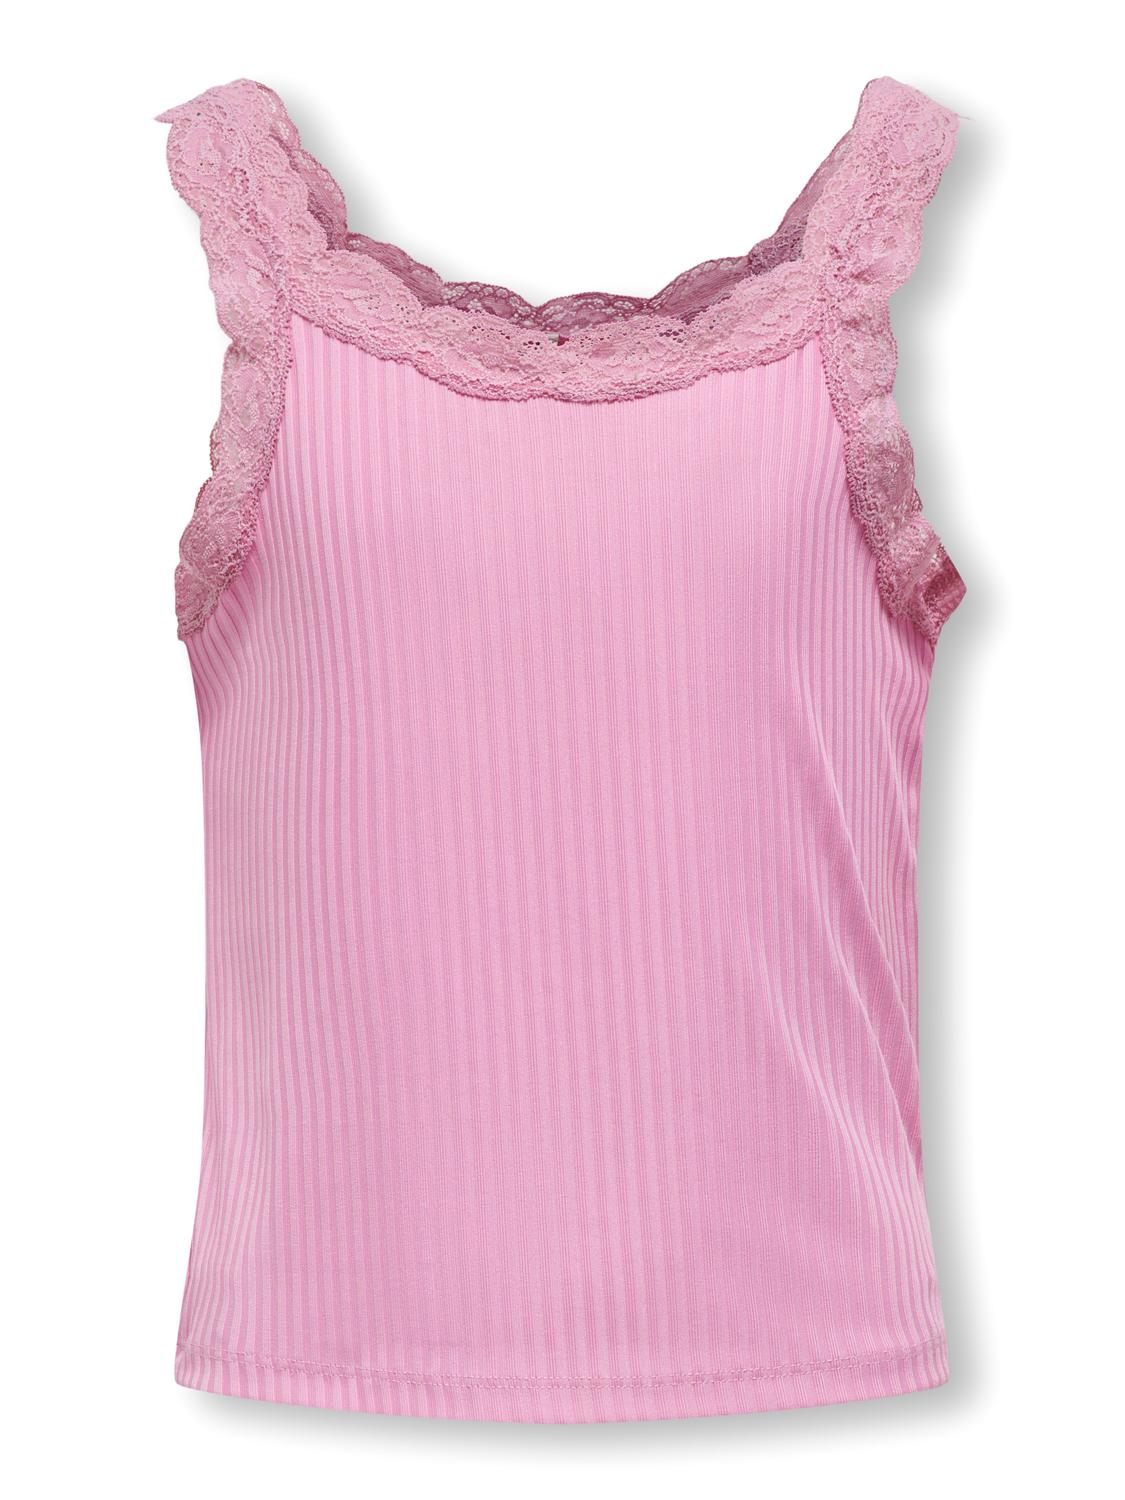 ONLY Top With Lace Edge -Begonia Pink - 15300004